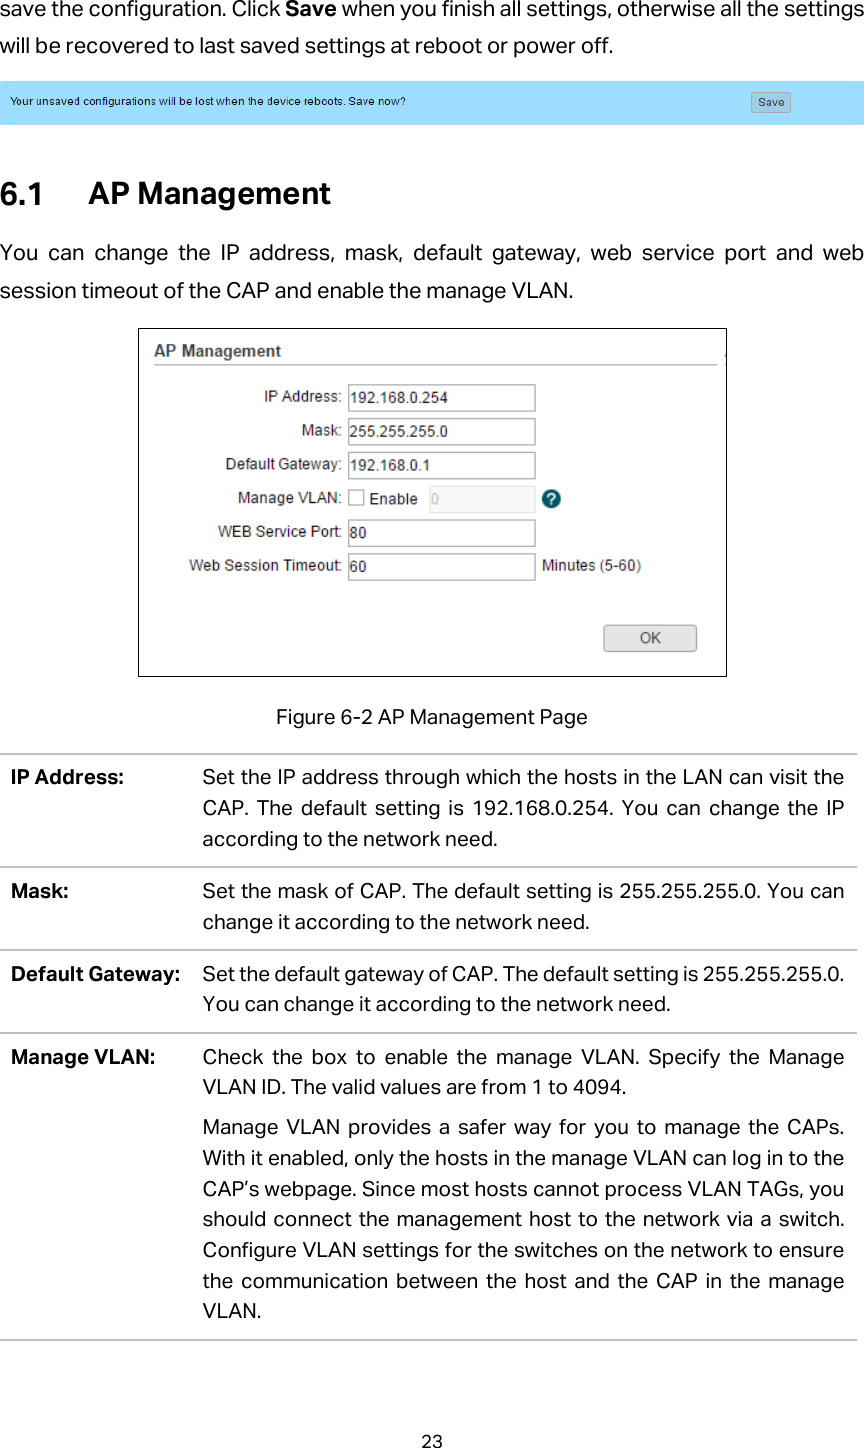 save the configuration. Click Save when you finish all settings, otherwise all the settings will be recovered to last saved settings at reboot or power off.   AP Management You can change the IP address, mask, default gateway, web service port and web session timeout of the CAP and enable the manage VLAN.  Figure 6-2 AP Management Page IP Address:  Set the IP address through which the hosts in the LAN can visit the CAP. The default setting is 192.168.0.254. You can change the IP according to the network need.   Mask:  Set the mask of CAP. The default setting is 255.255.255.0. You can change it according to the network need. Default Gateway: Set the default gateway of CAP. The default setting is 255.255.255.0. You can change it according to the network need. Manage VLAN: Check the box to enable the manage VLAN. Specify the Manage VLAN ID. The valid values are from 1 to 4094. Manage VLAN provides a safer way for you to manage the CAPs. With it enabled, only the hosts in the manage VLAN can log in to the CAP’s webpage. Since most hosts cannot process VLAN TAGs, you should connect the management host to the network via a switch. Configure VLAN settings for the switches on the network to ensure the communication between the host and the CAP in the manage VLAN. 23  